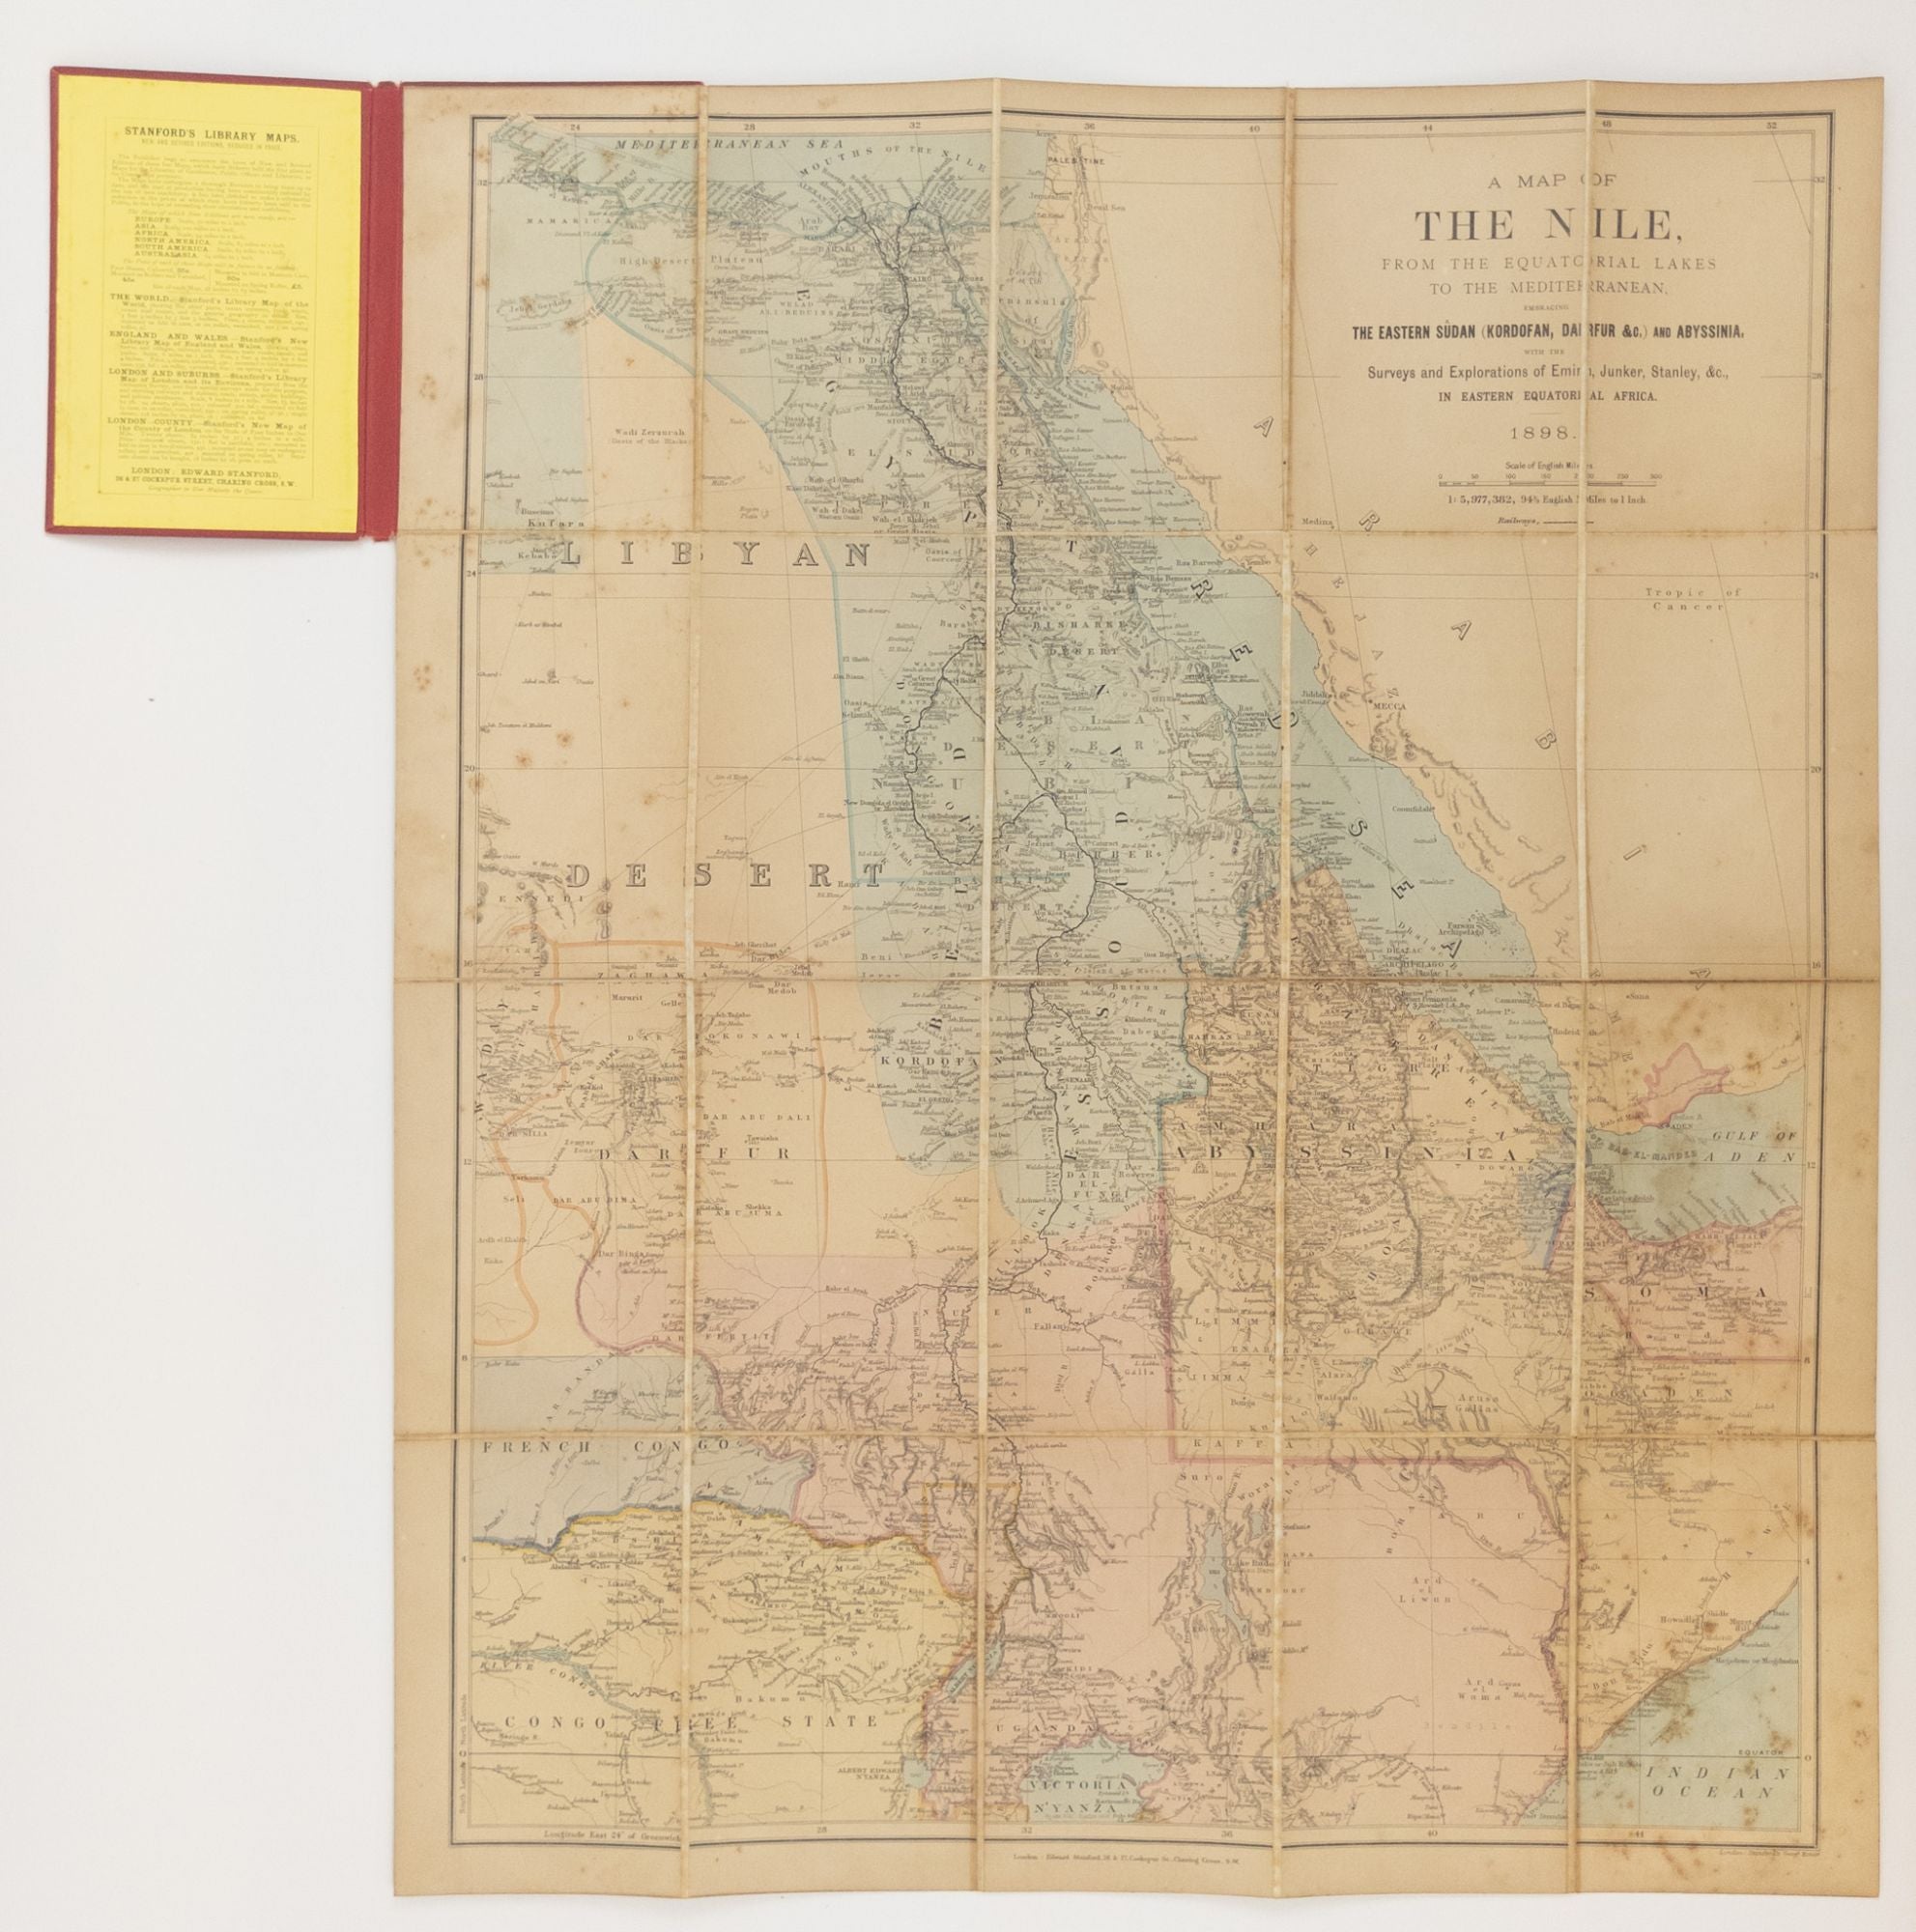 Product Image for MAP OF THE NILE, FROM THE EQUATORIAL LAKES TO THE MEDITERRANEAN, EMBRACING THE EASTERN SUDAN AND ABYSSINIA